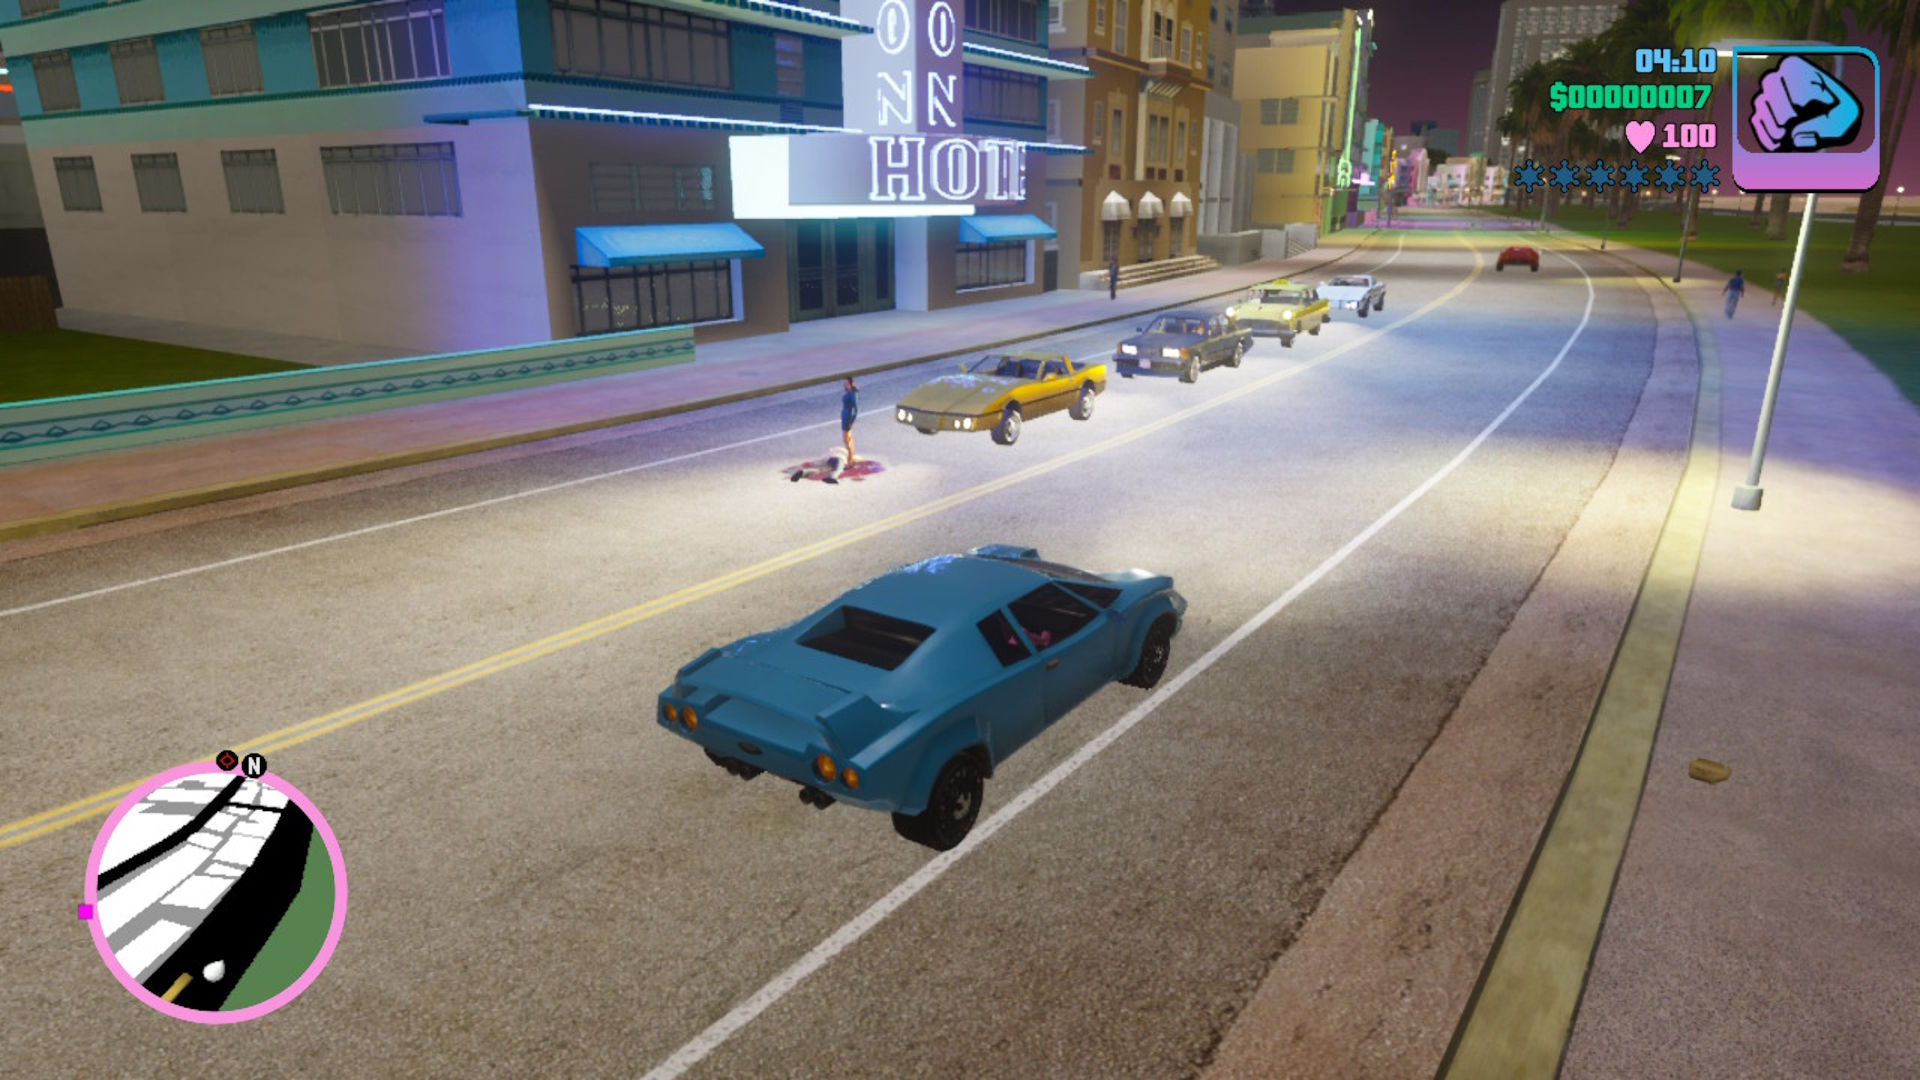 Review: GTA Trilogy: Definitive Edition is a disappointment on Switch